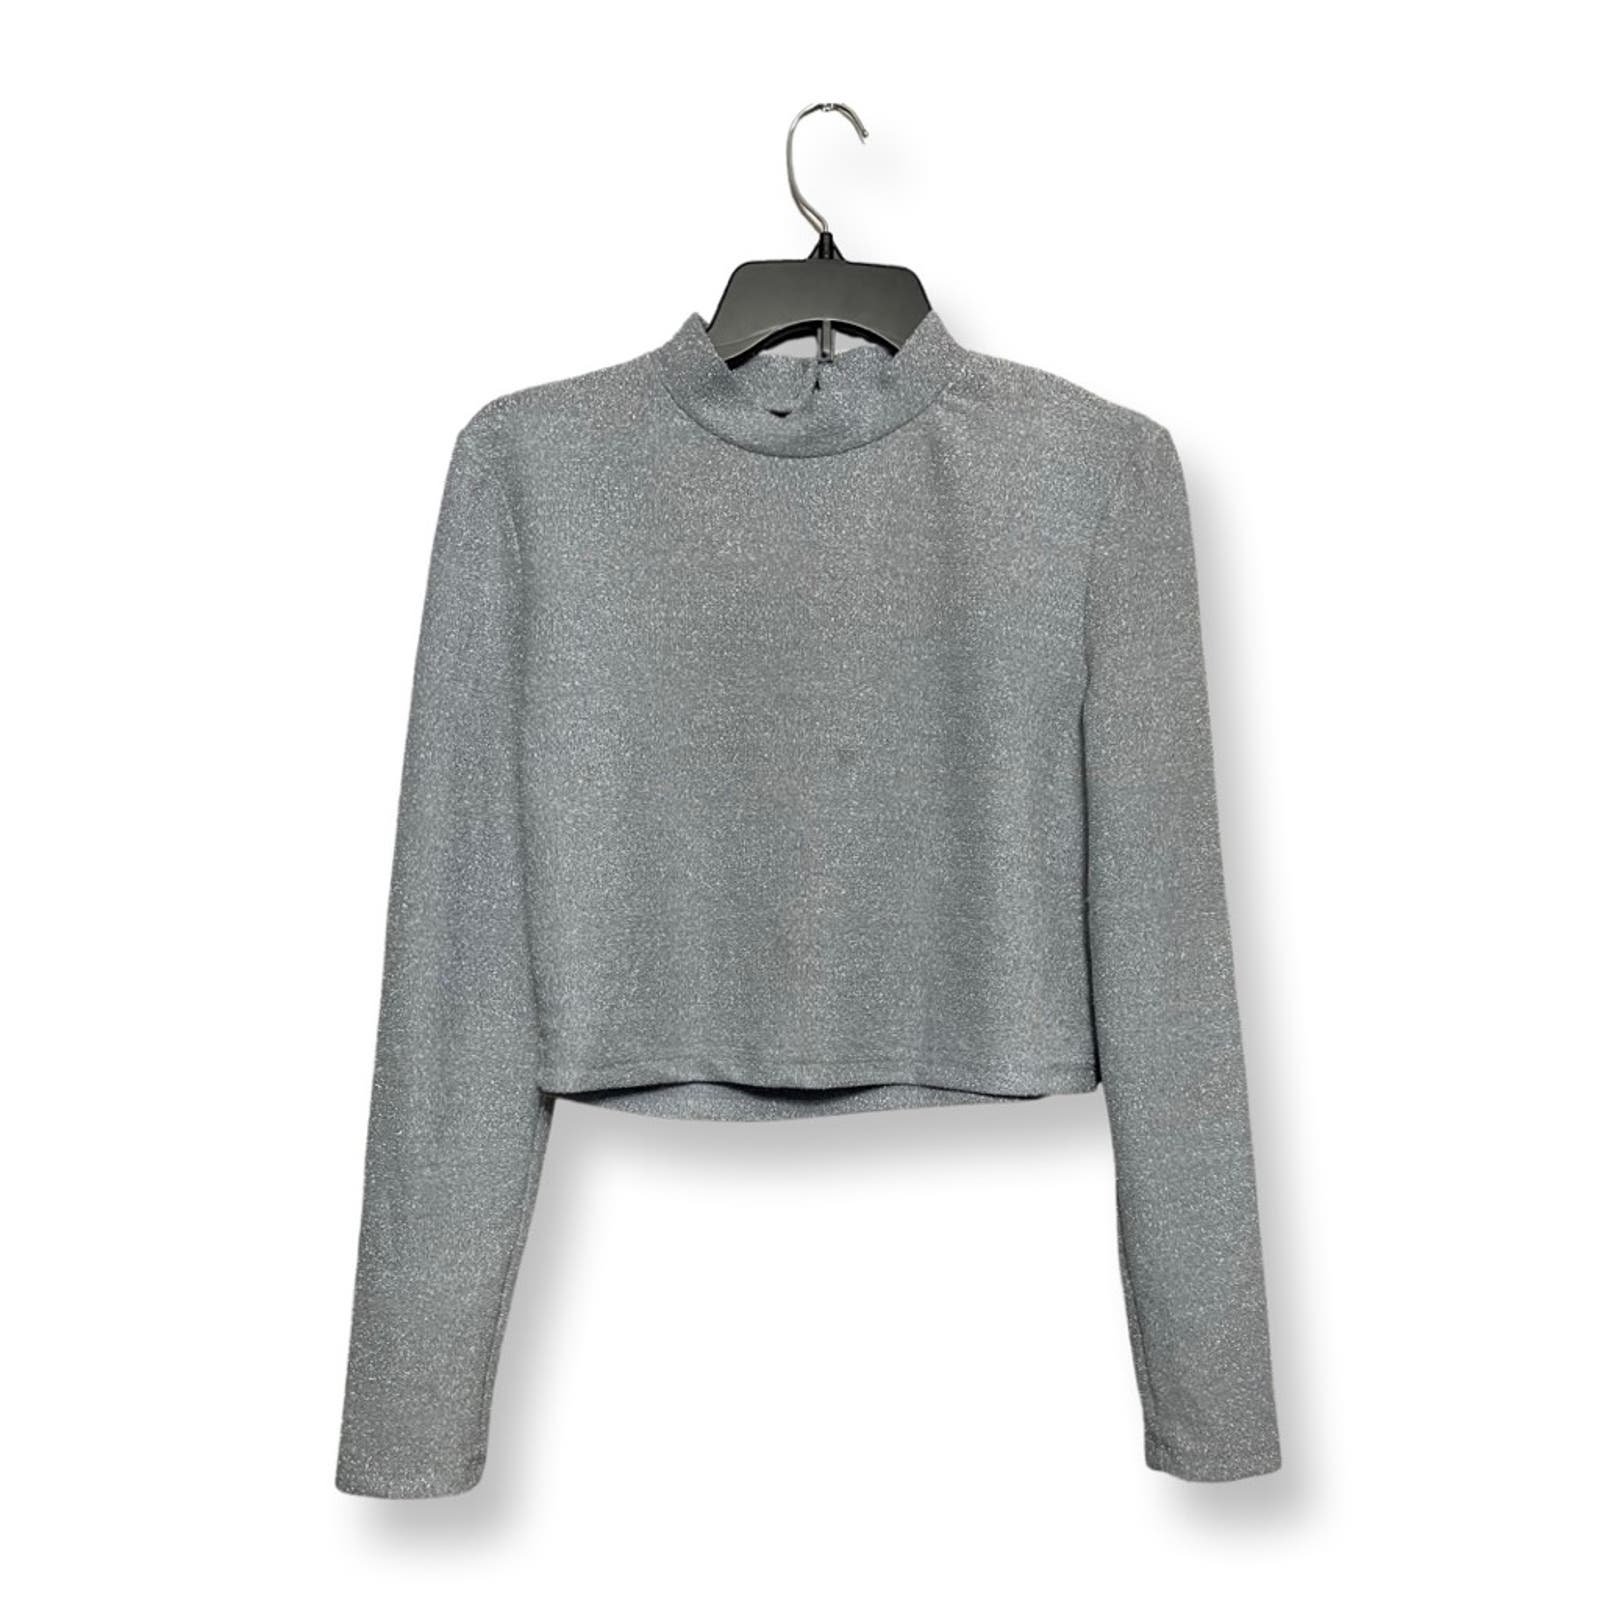 Personality Elodie Womens Crop Top Gray/Silver Long Sle